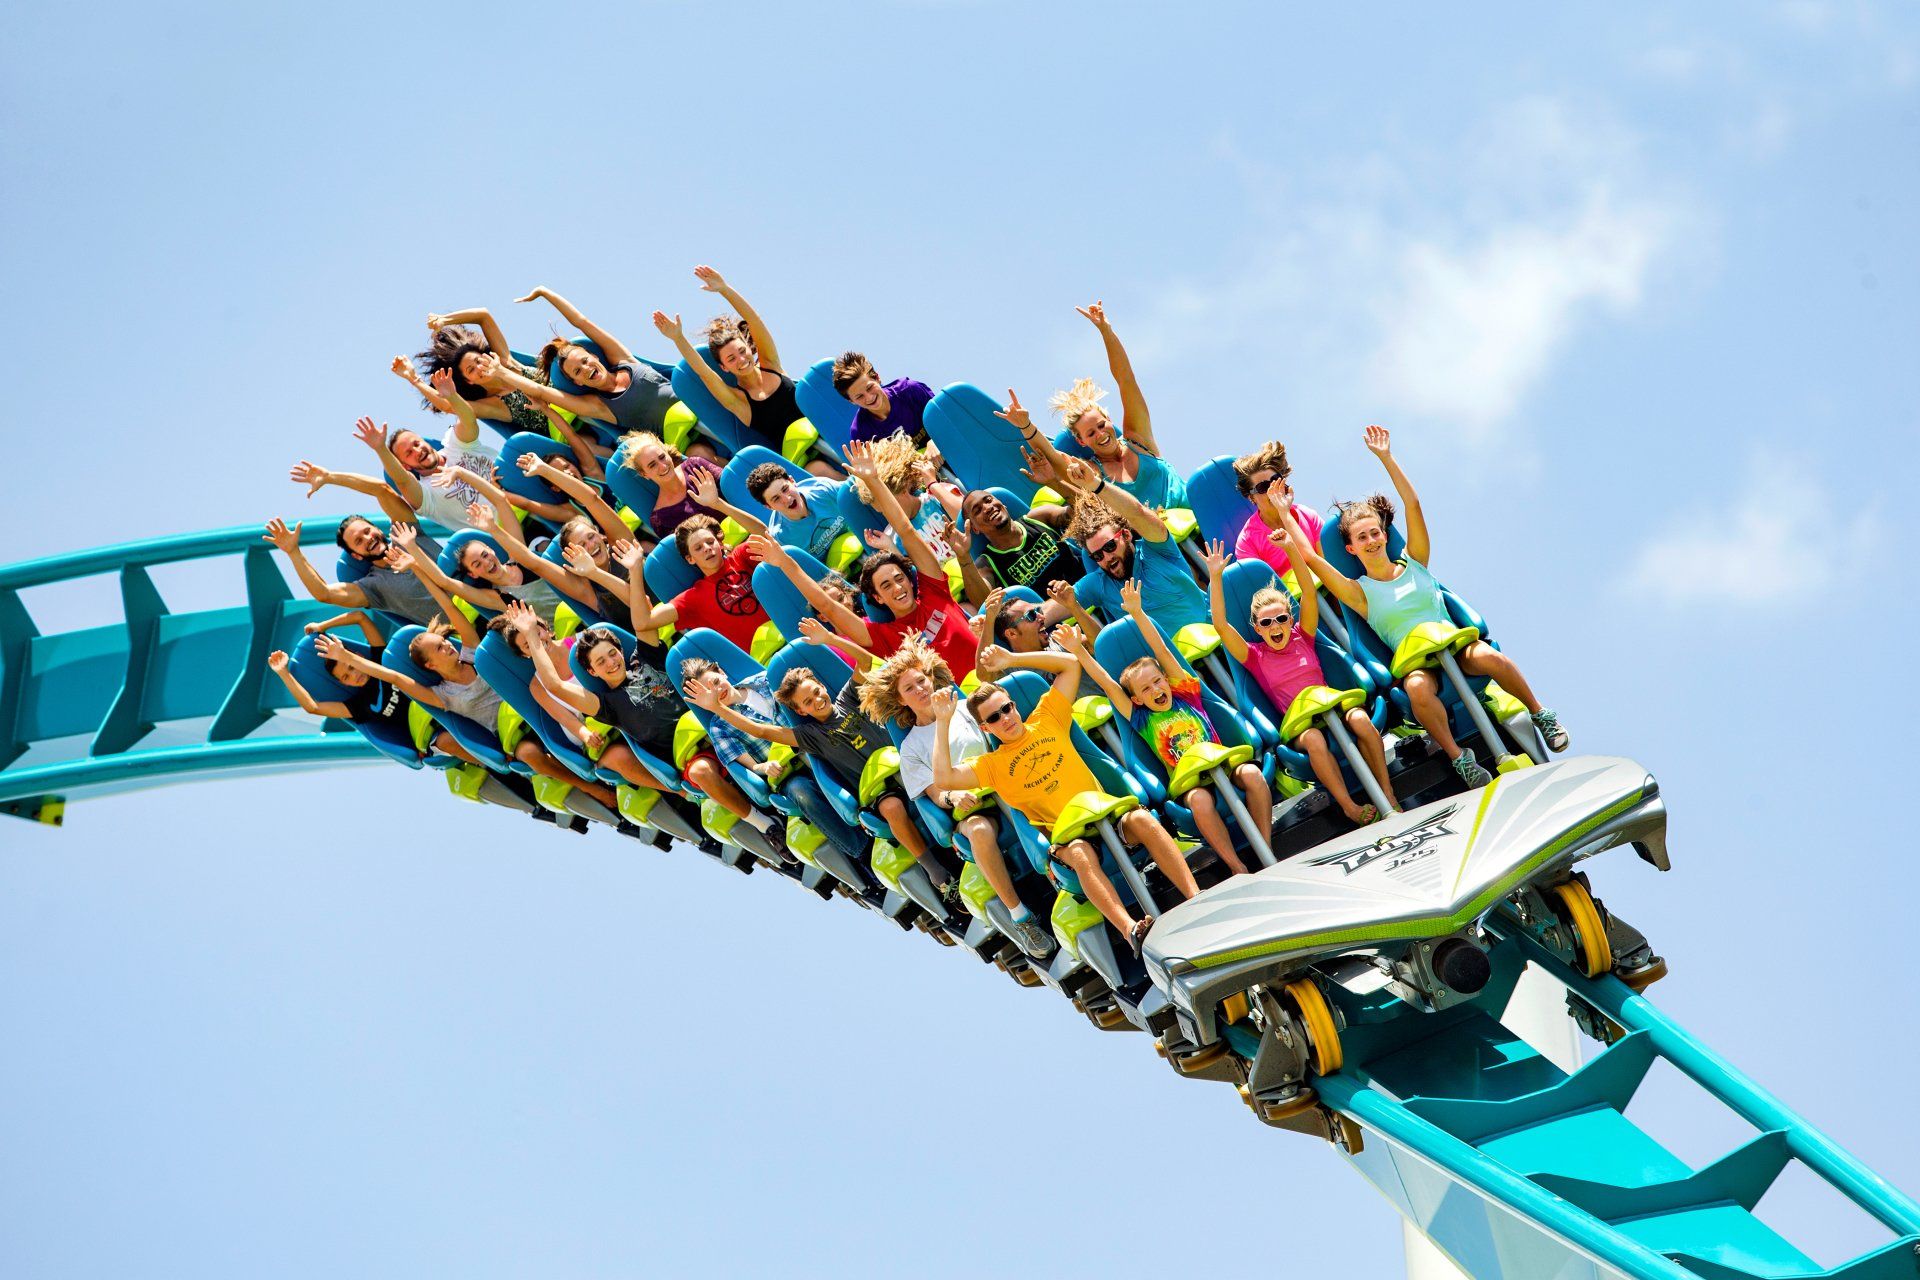 Rollercoaster riders raise their hands